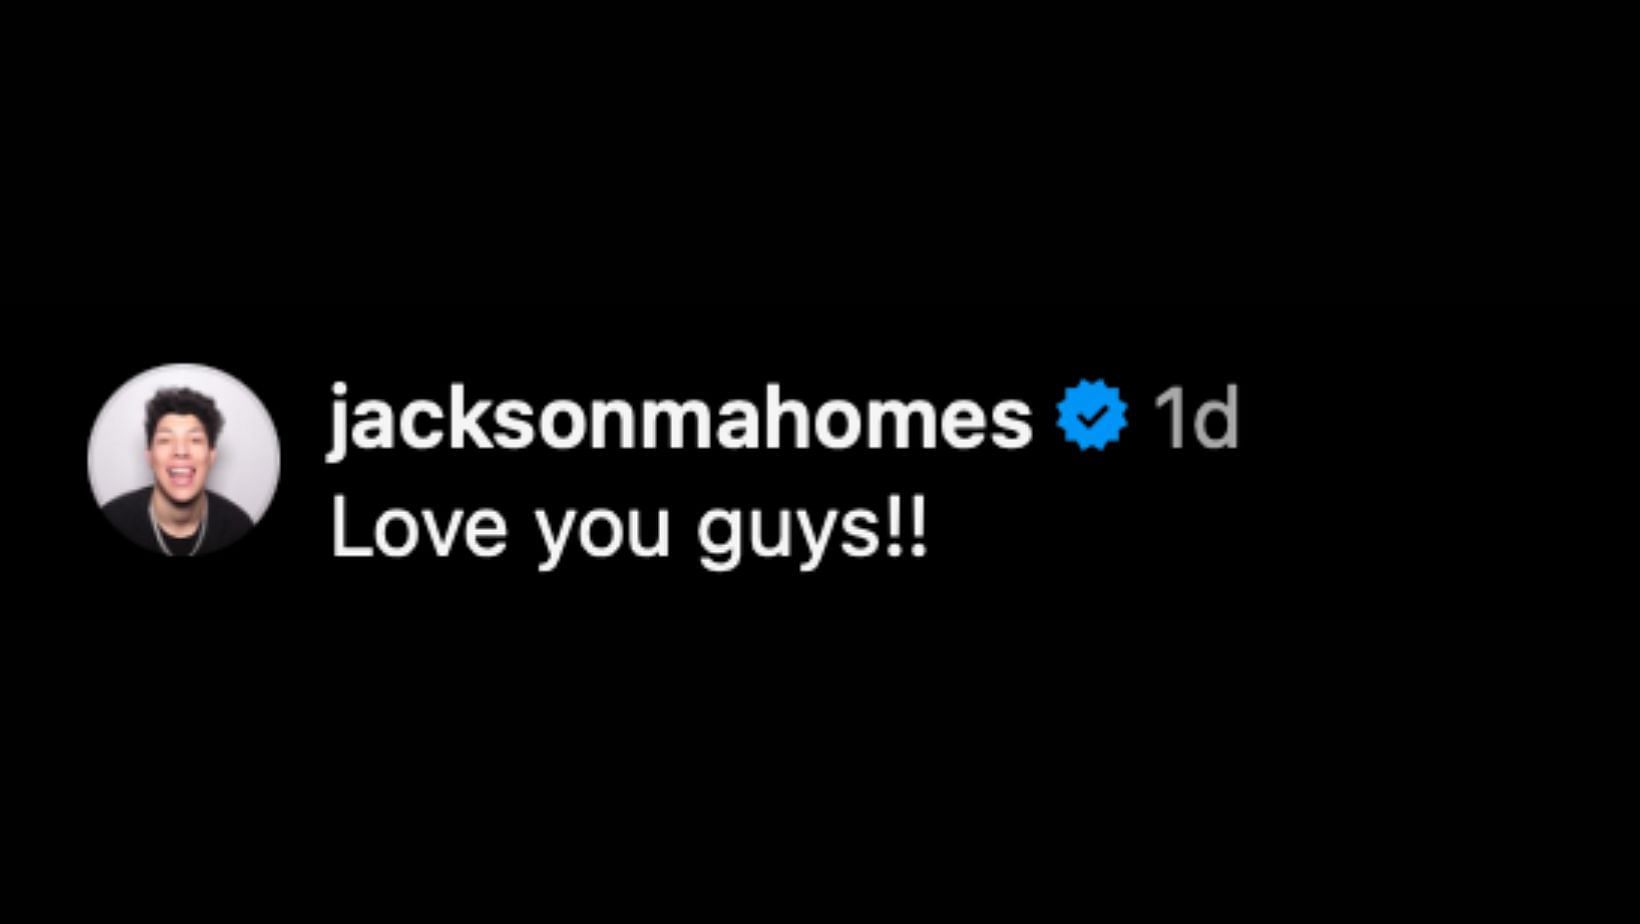 Jackson&#039;s three-word comment on Brittany Mahomes&#039; IG post